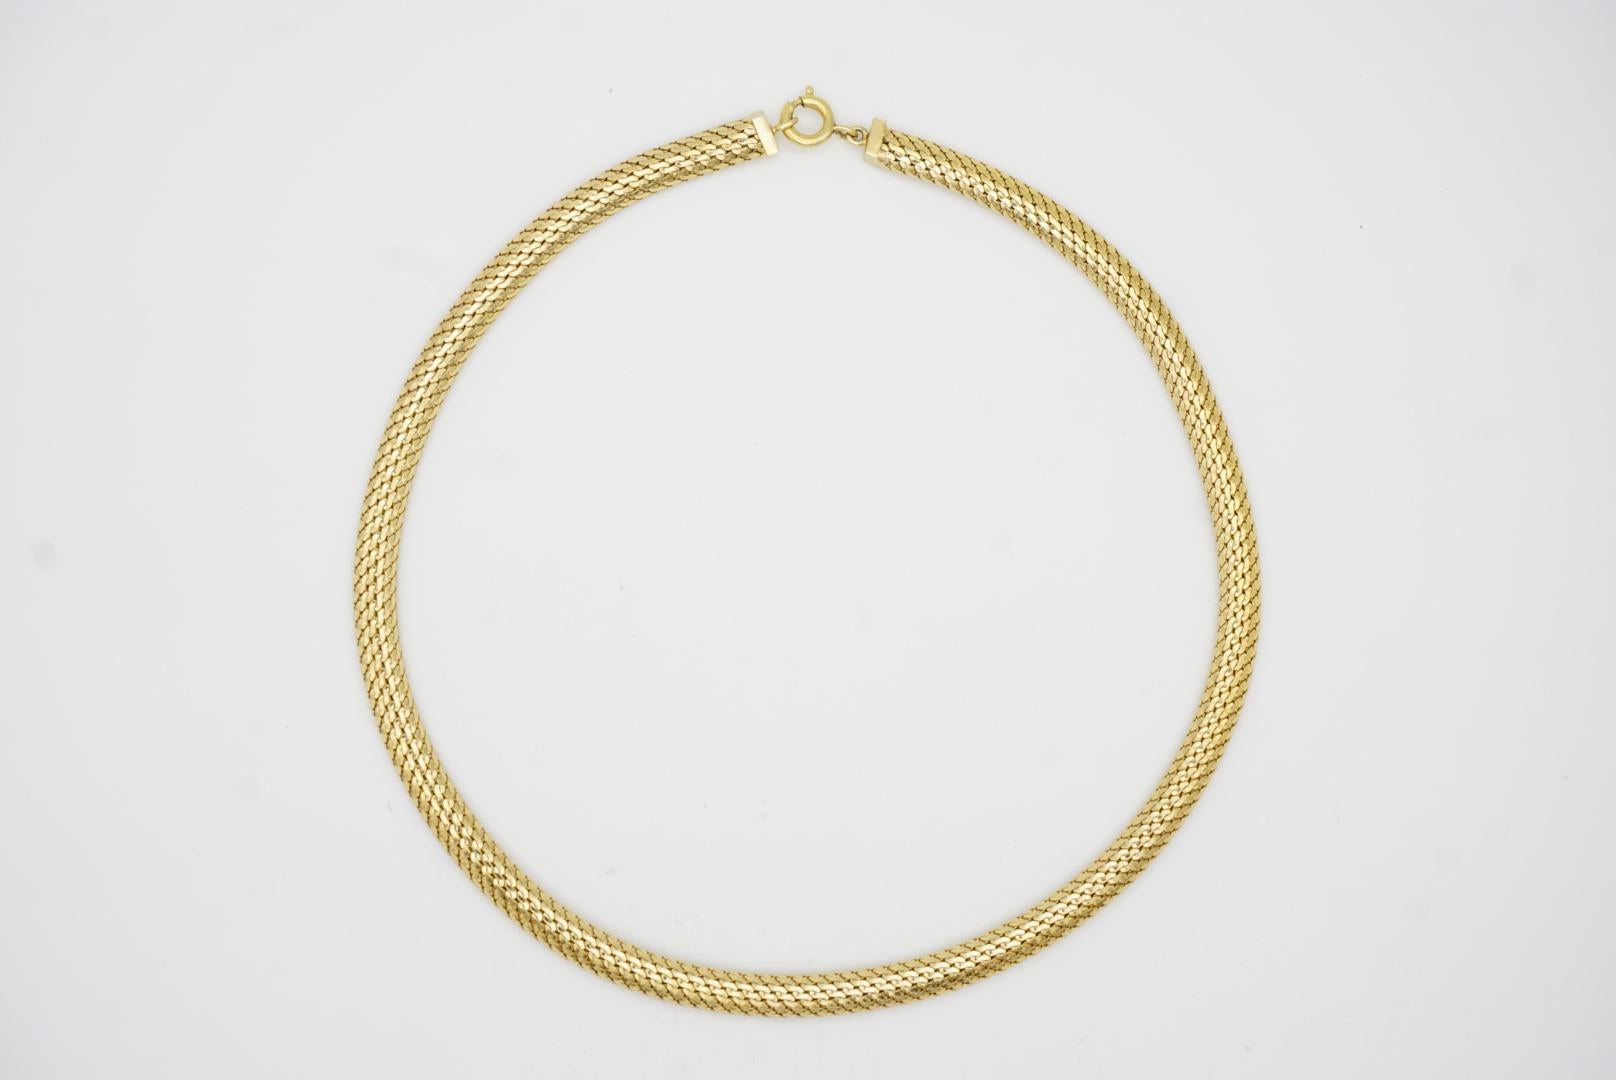 Christian Dior GROSSE 1965 Herringbone Classic Curb Woven Chain Rope Necklace 5